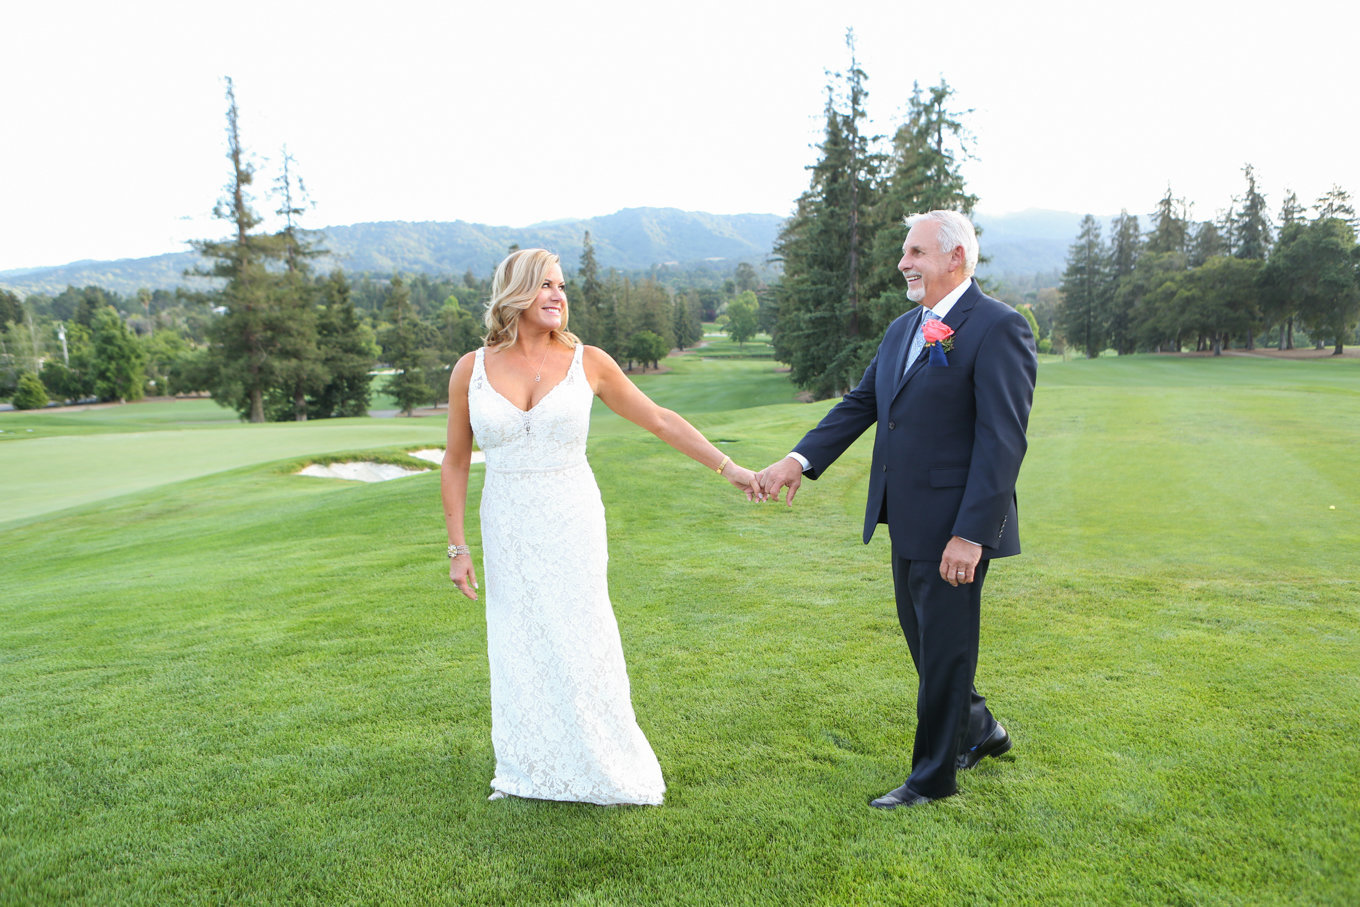 Bride and groom walk on golf course in northern california. Beautiful country club wedding